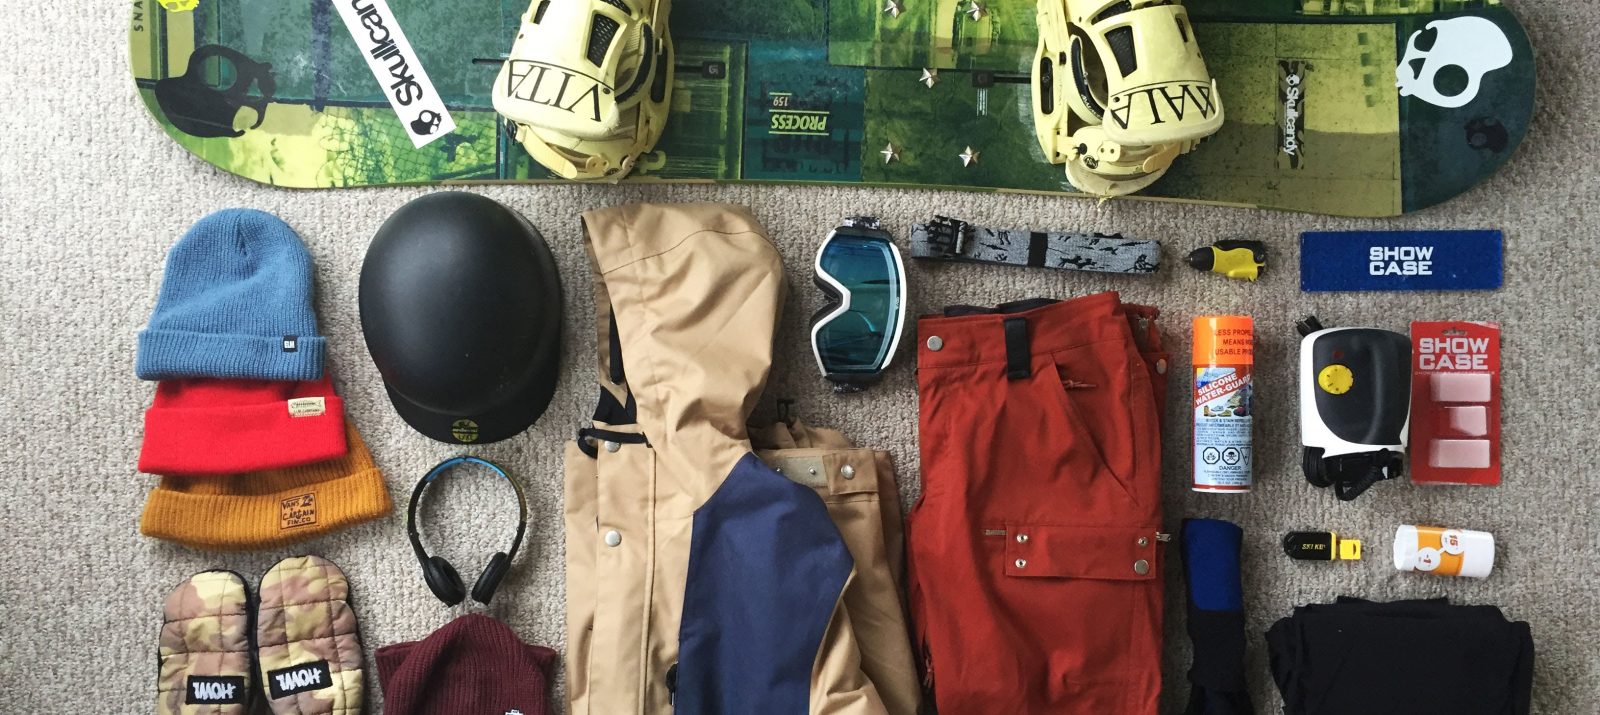 how to store snowboards and snowboarding gear step 1: check everything for damage